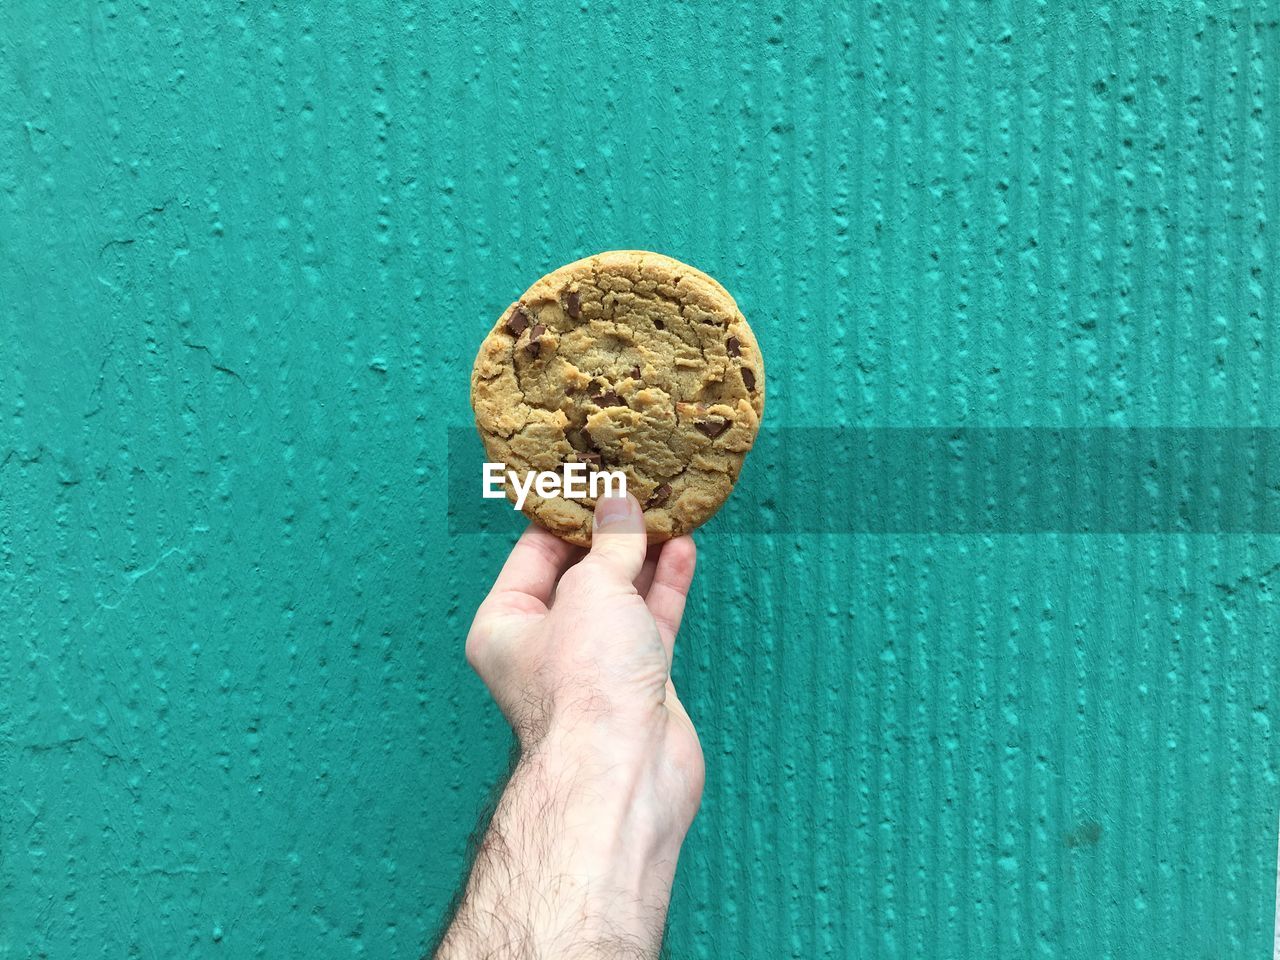 Cropped image of hand holding cookie against wall